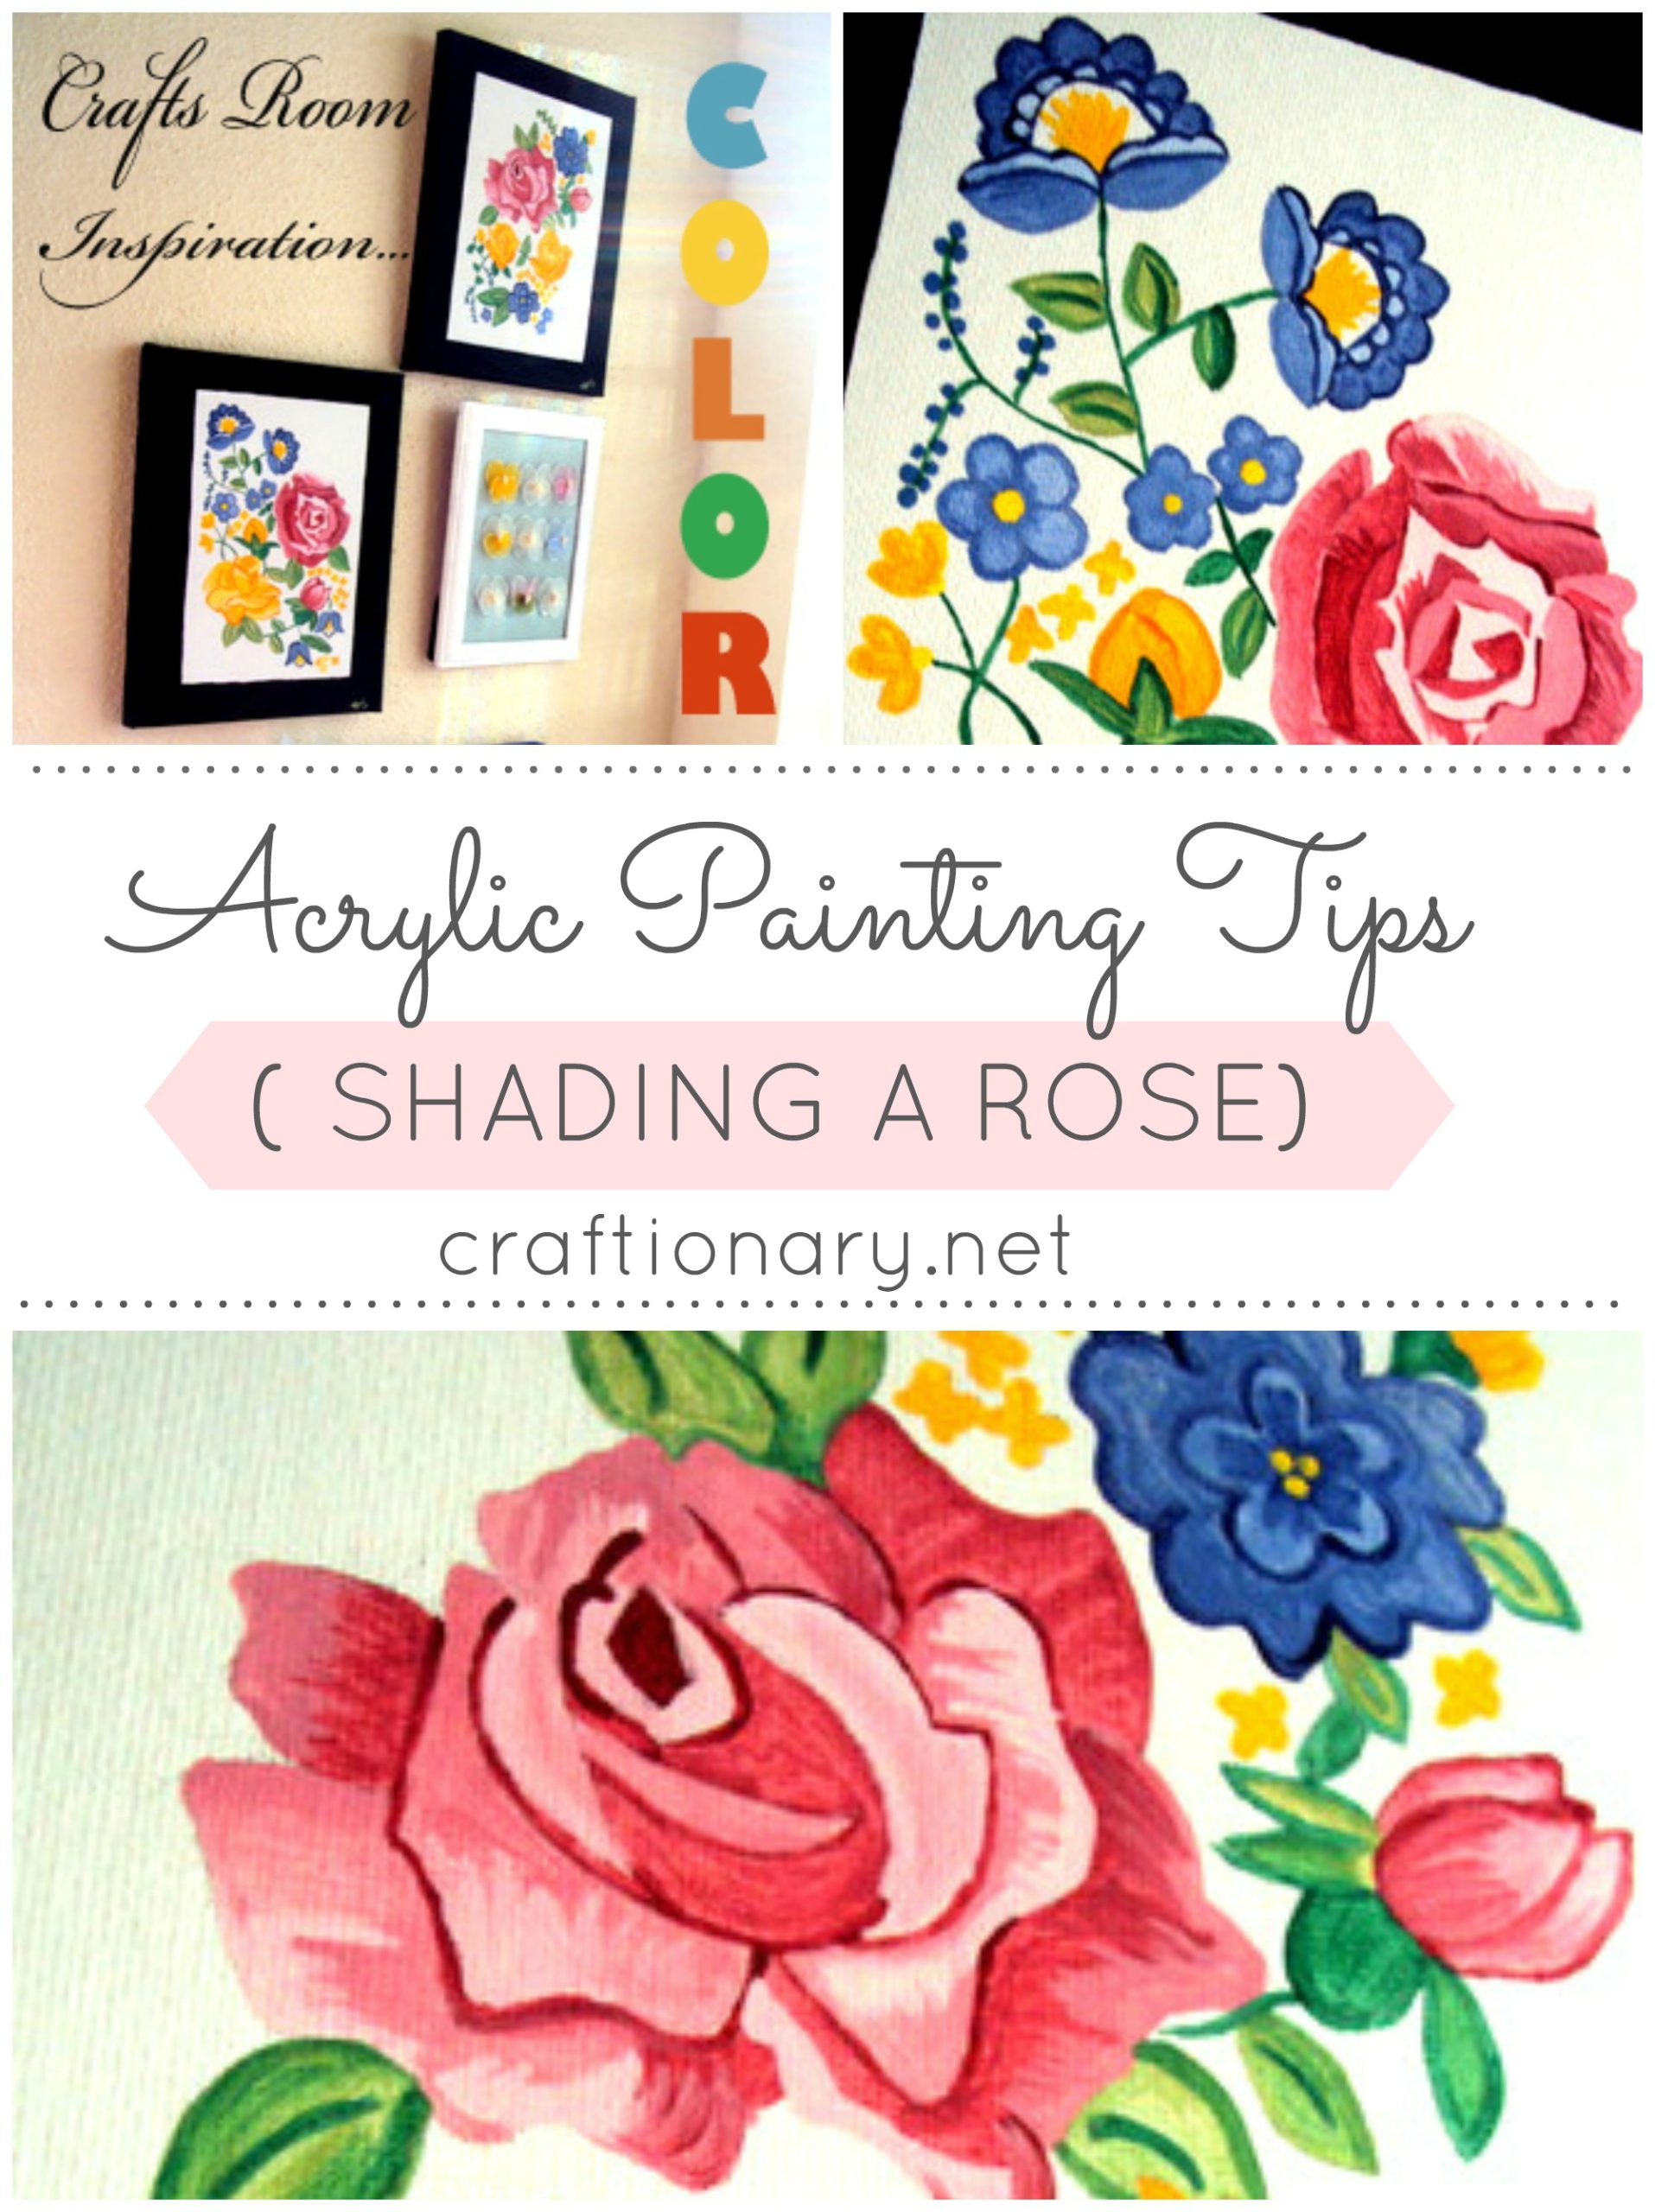 How to Choose the Right Canvas for Your Acrylic Painting - Trembeling Art